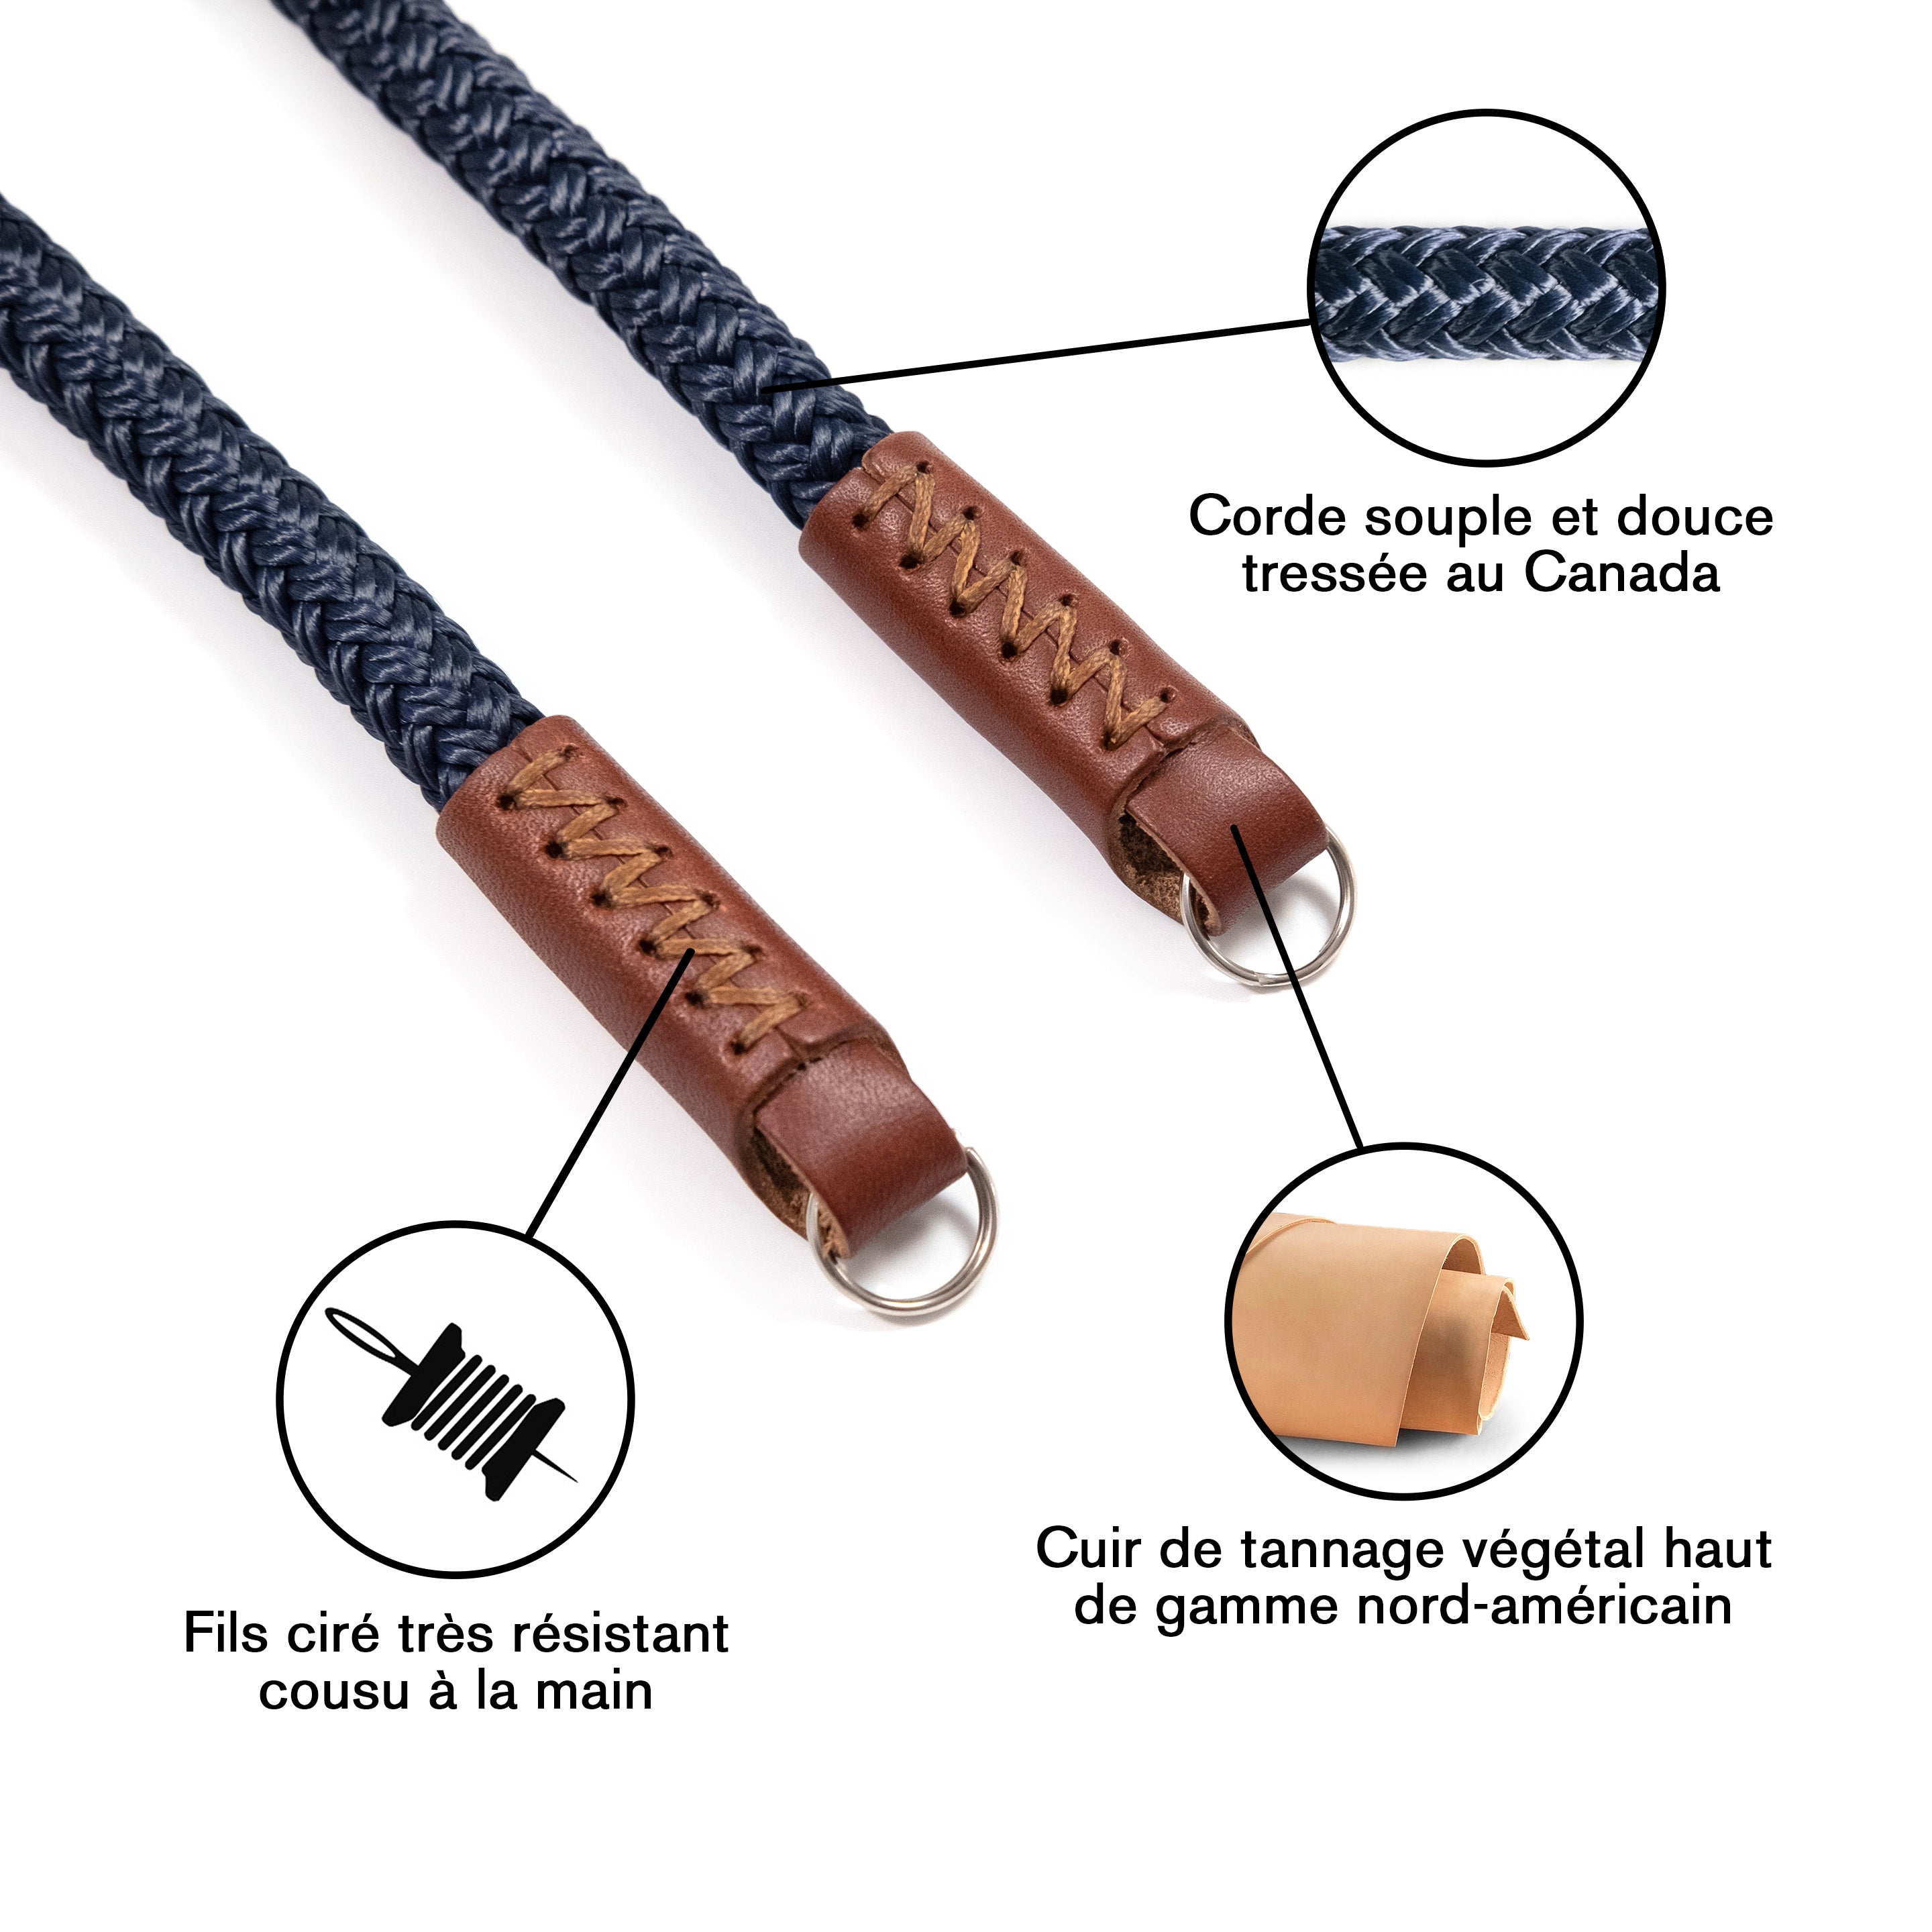 Fab' F8 strap - Blue rope, brown leather - Size S (39")